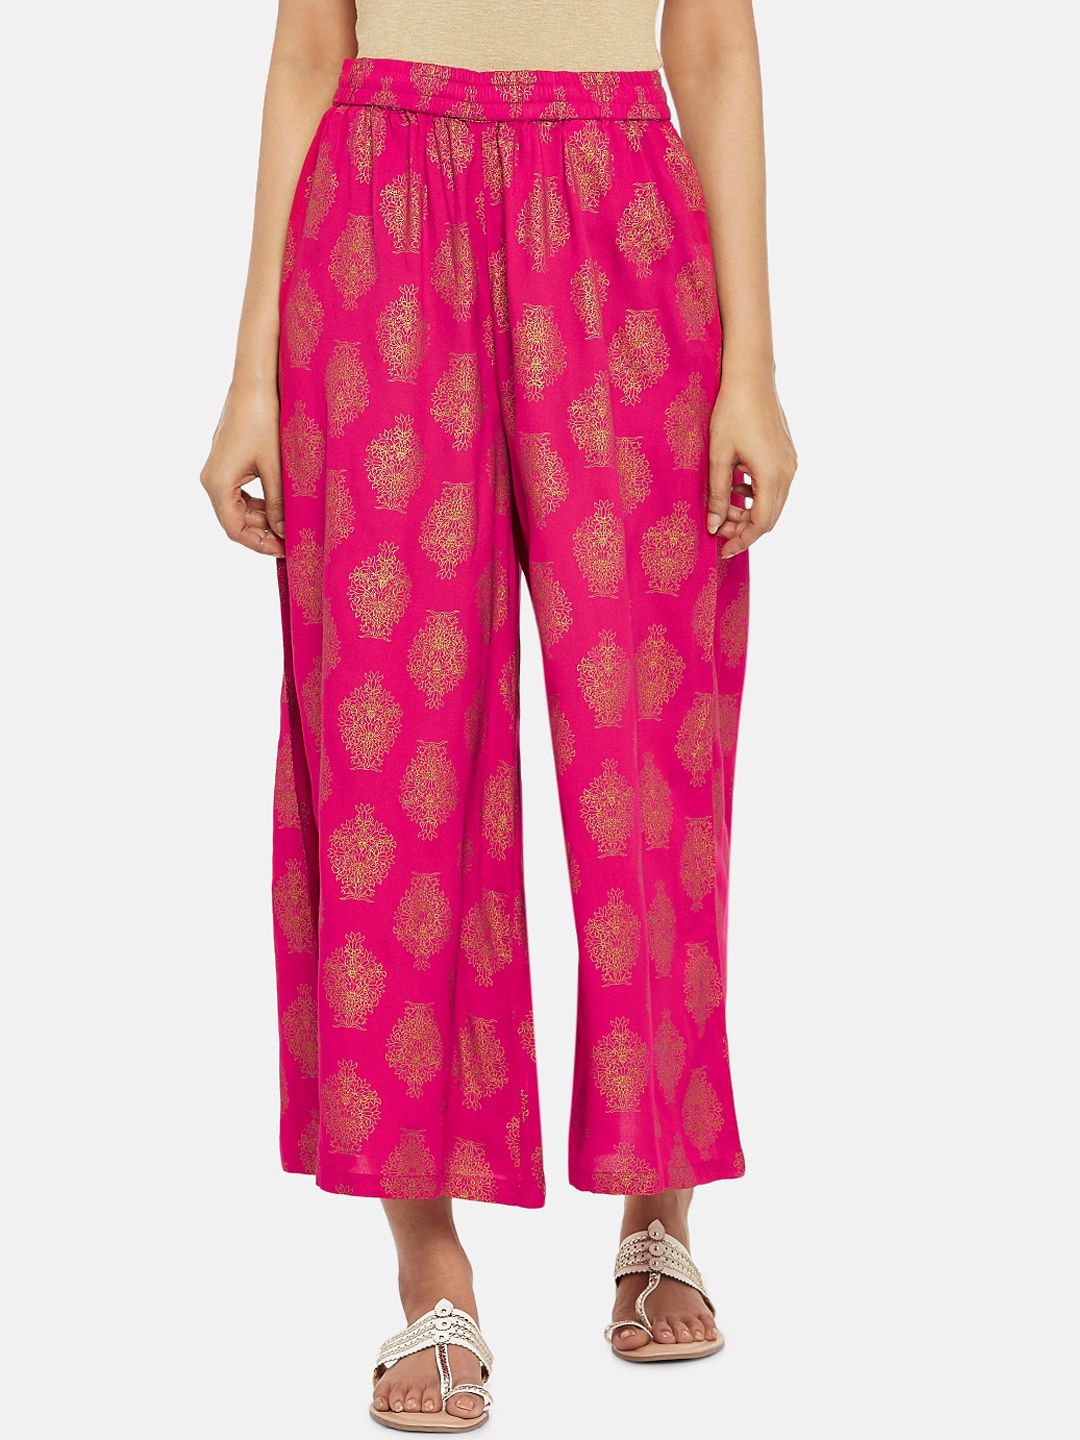 RANGMANCH BY PANTALOONS Women Pink Printed Straight Palazzos Price in India